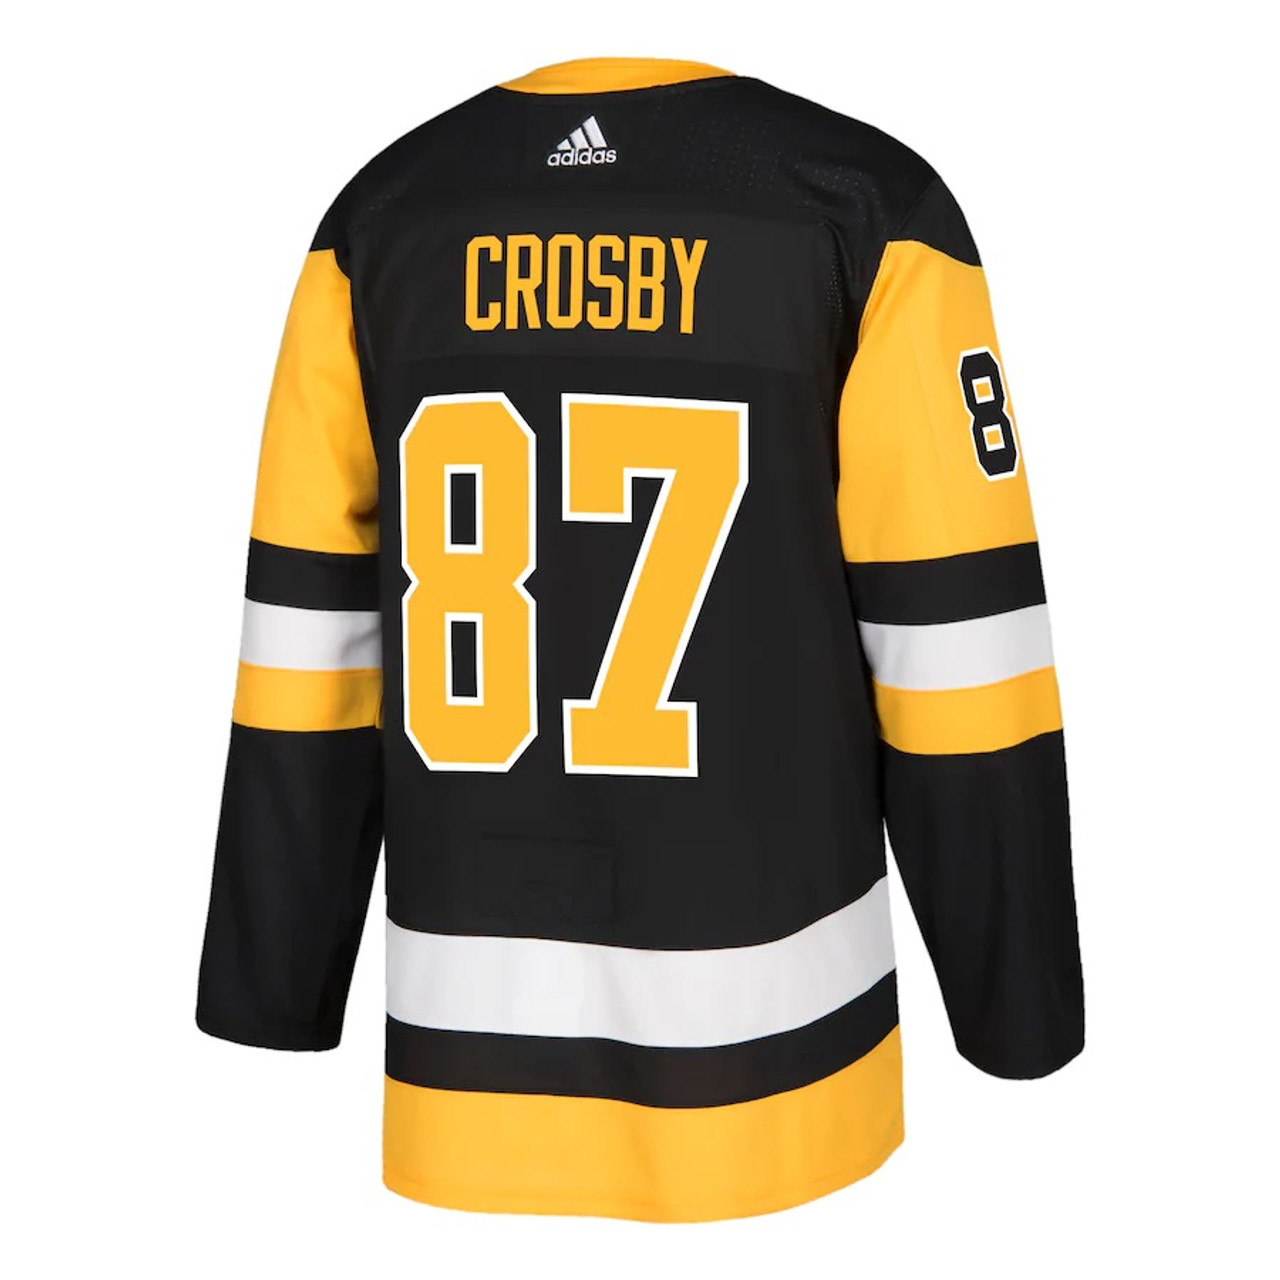 PITTSBURGH PENGUINS AUTHENTIC ALTERNATE CROSBY JERSEY